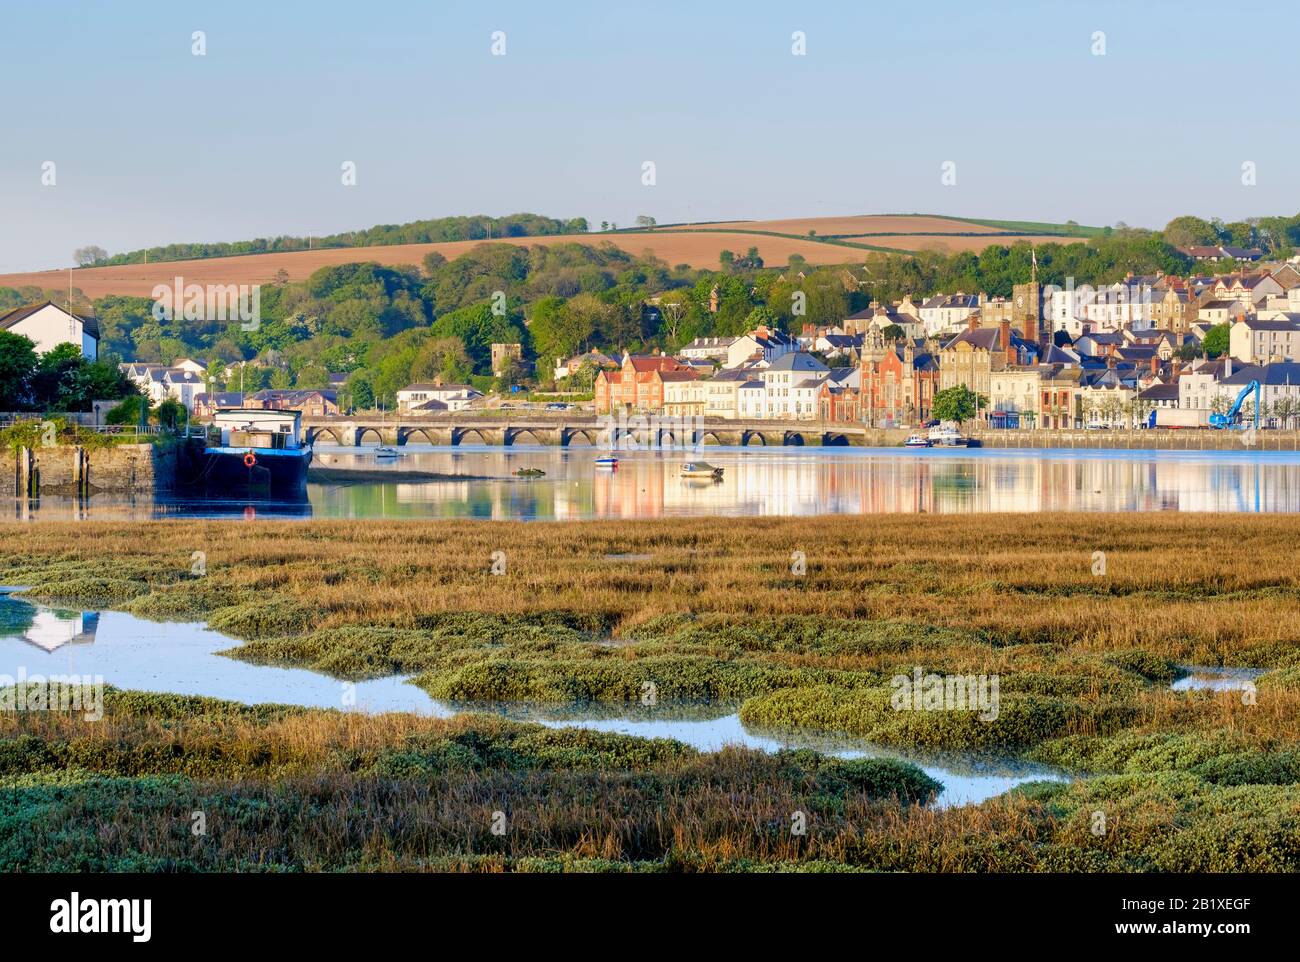 View of Bideford, Market town, NorthDevon south West across the river Torridge towards the old bridge, from the river bank Stock Photo